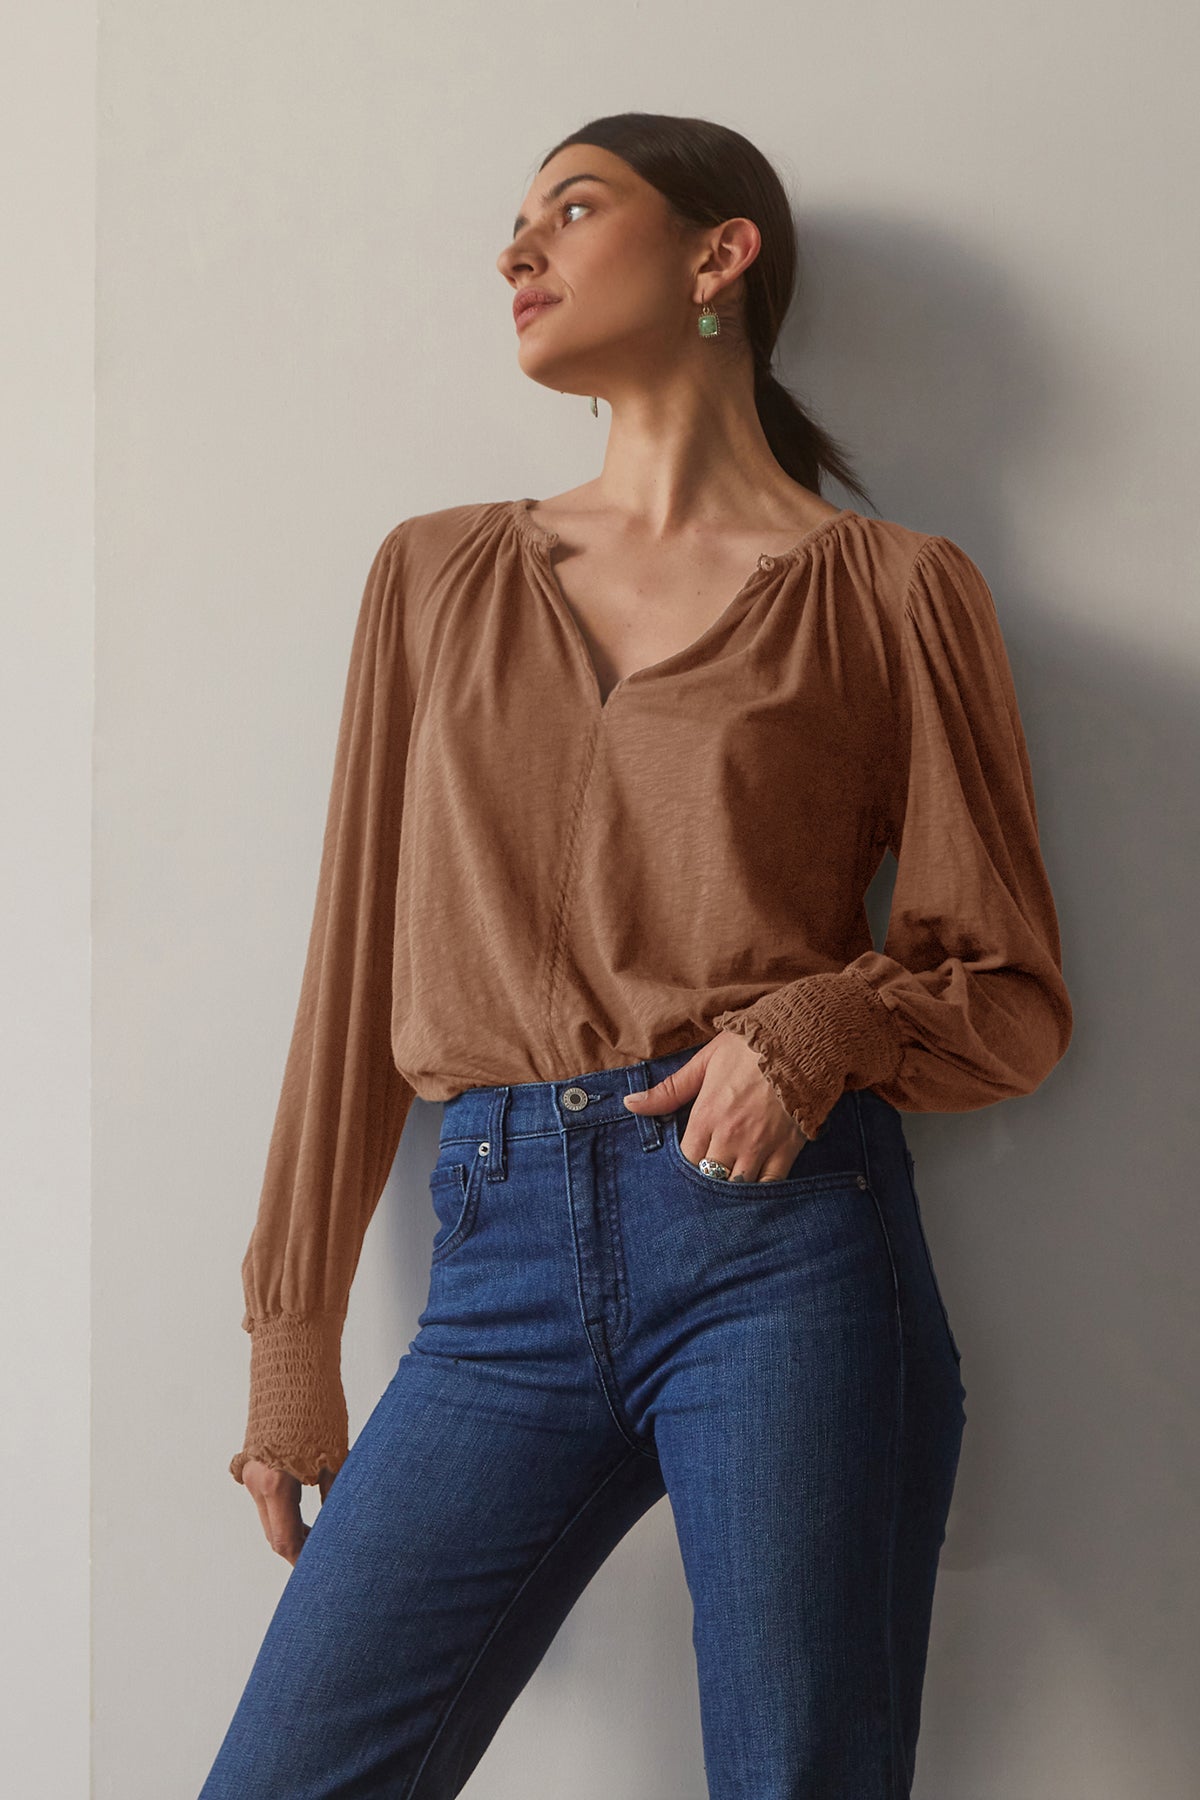   A bohemian chic woman wearing Velvet by Graham & Spencer cotton slub jeans and a shirred brown blouse. 